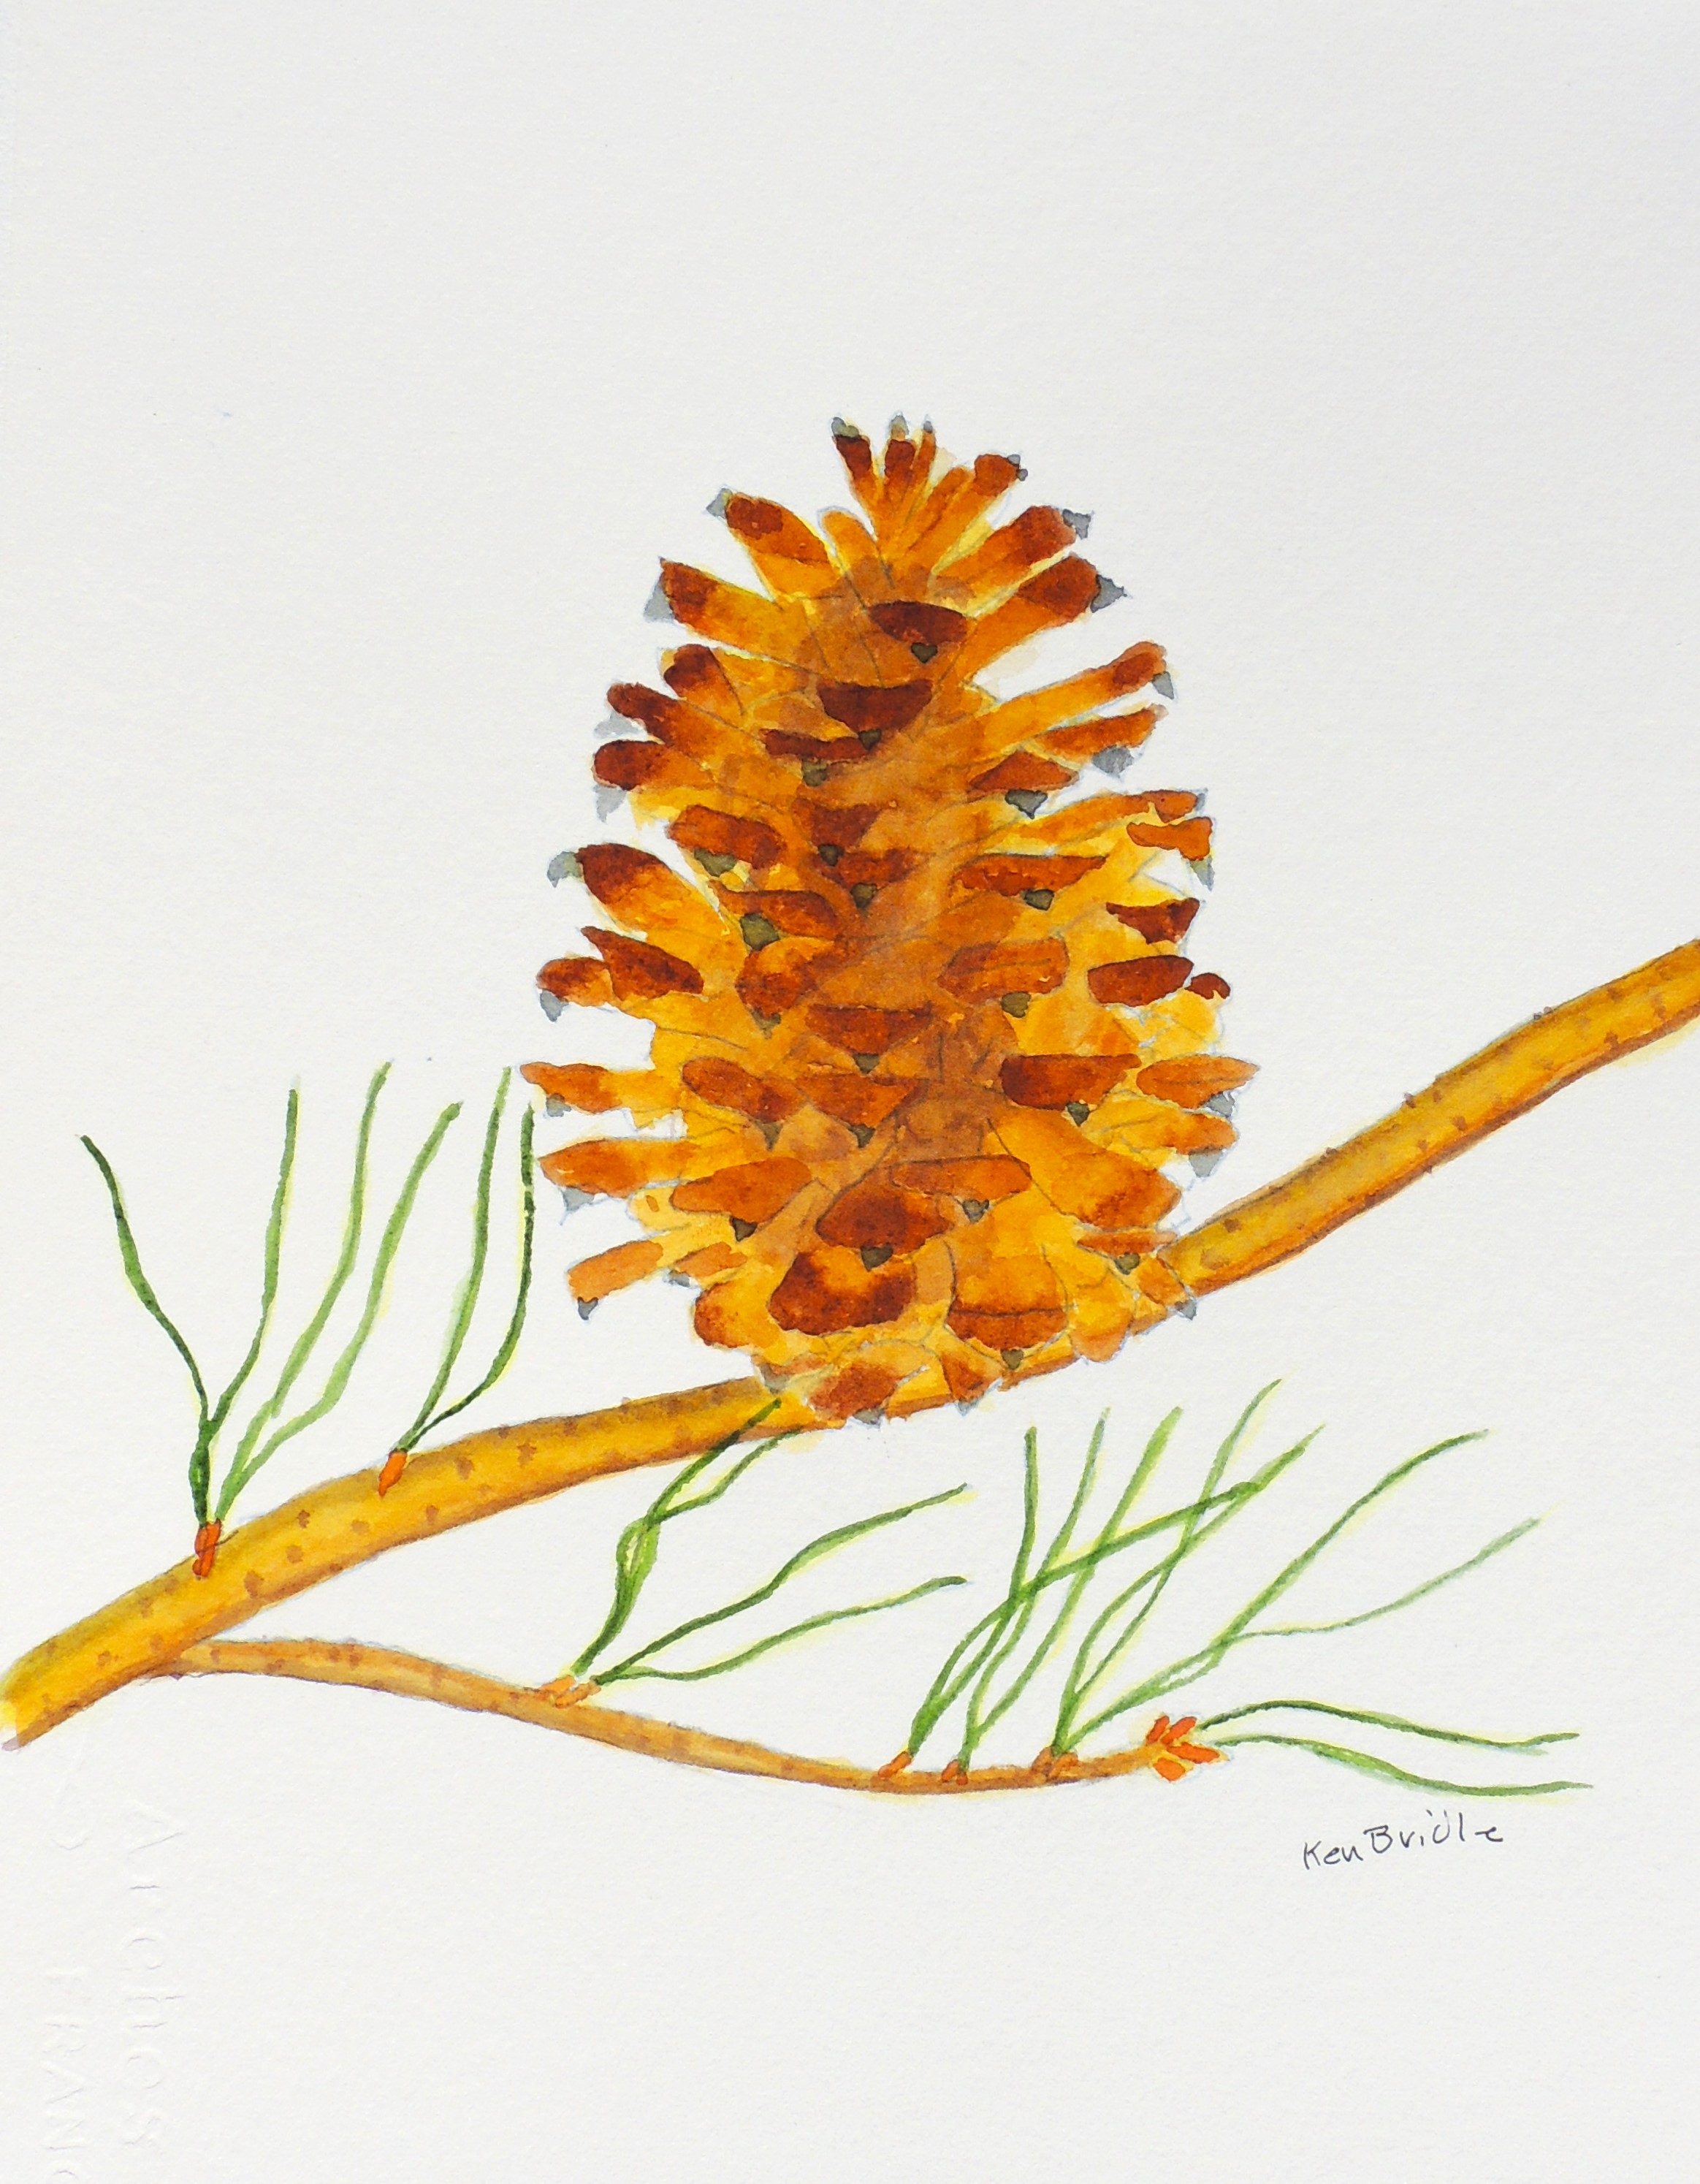 Pinecone painting by Ken Bridle